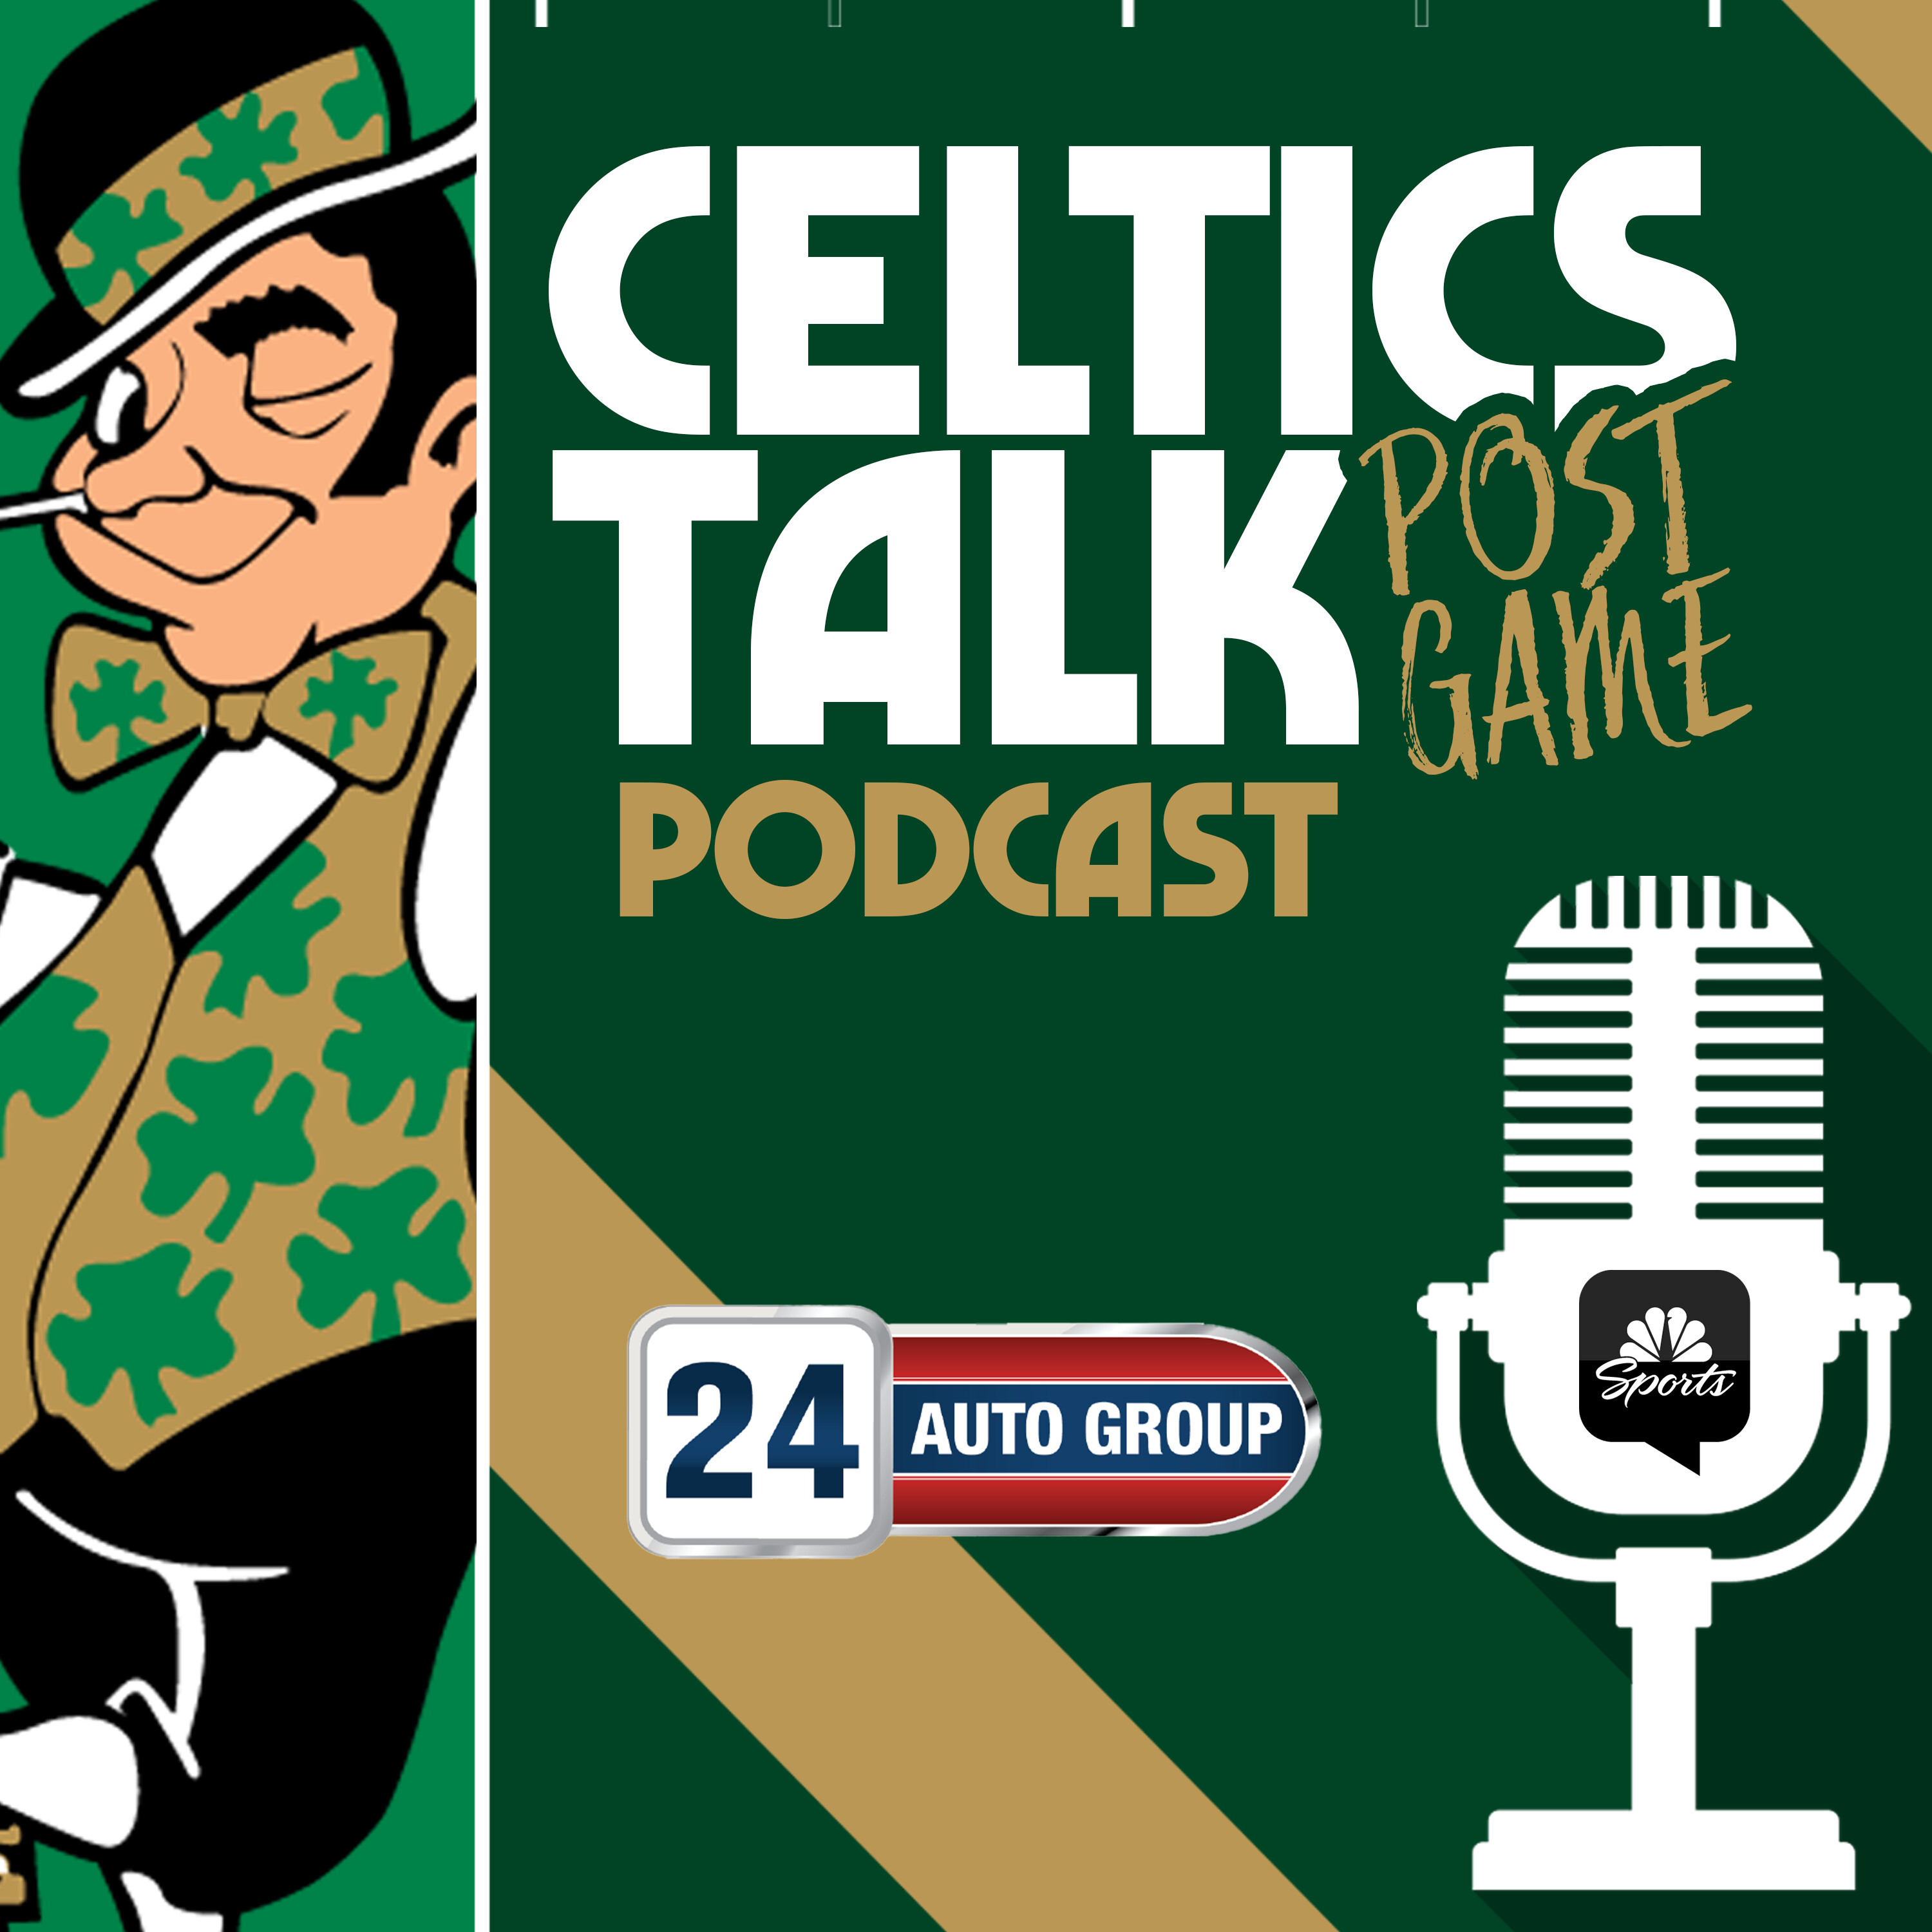 POSTGAME POD: Celtics hold off the Heat in ECF rematch, improve to 2-0